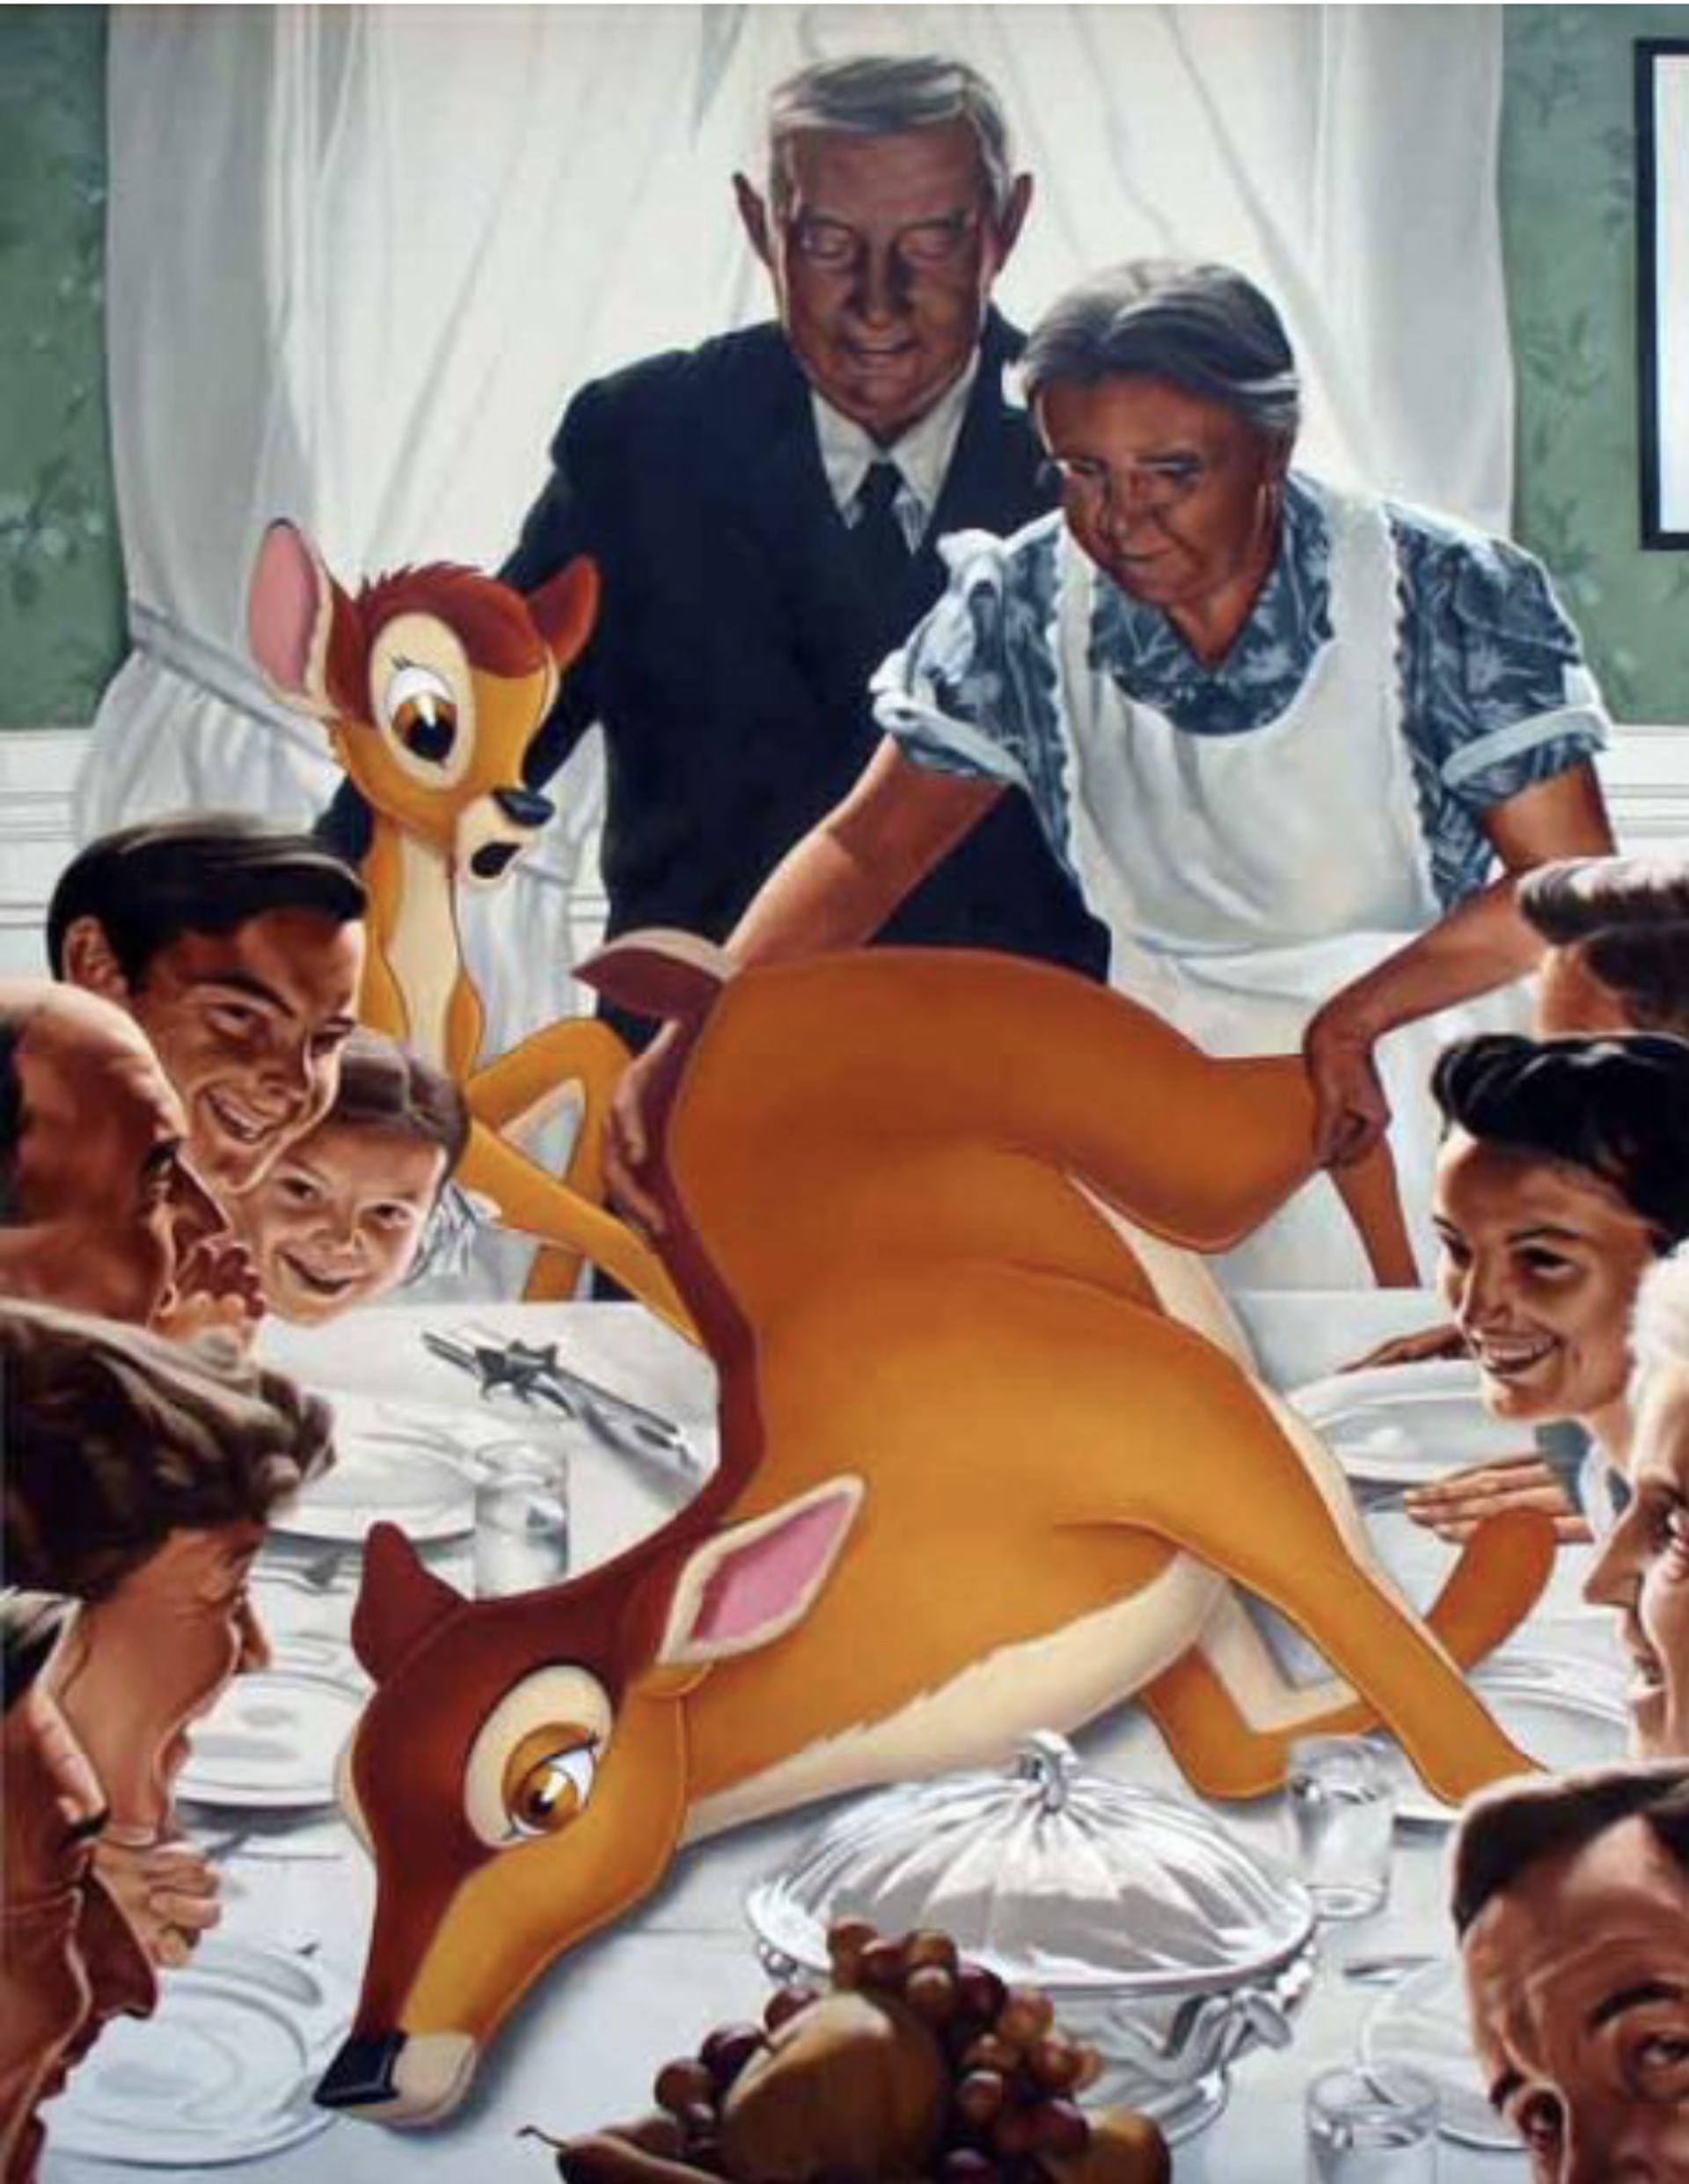 Bambi (It's Whats For Dinner) by Michael Thrush